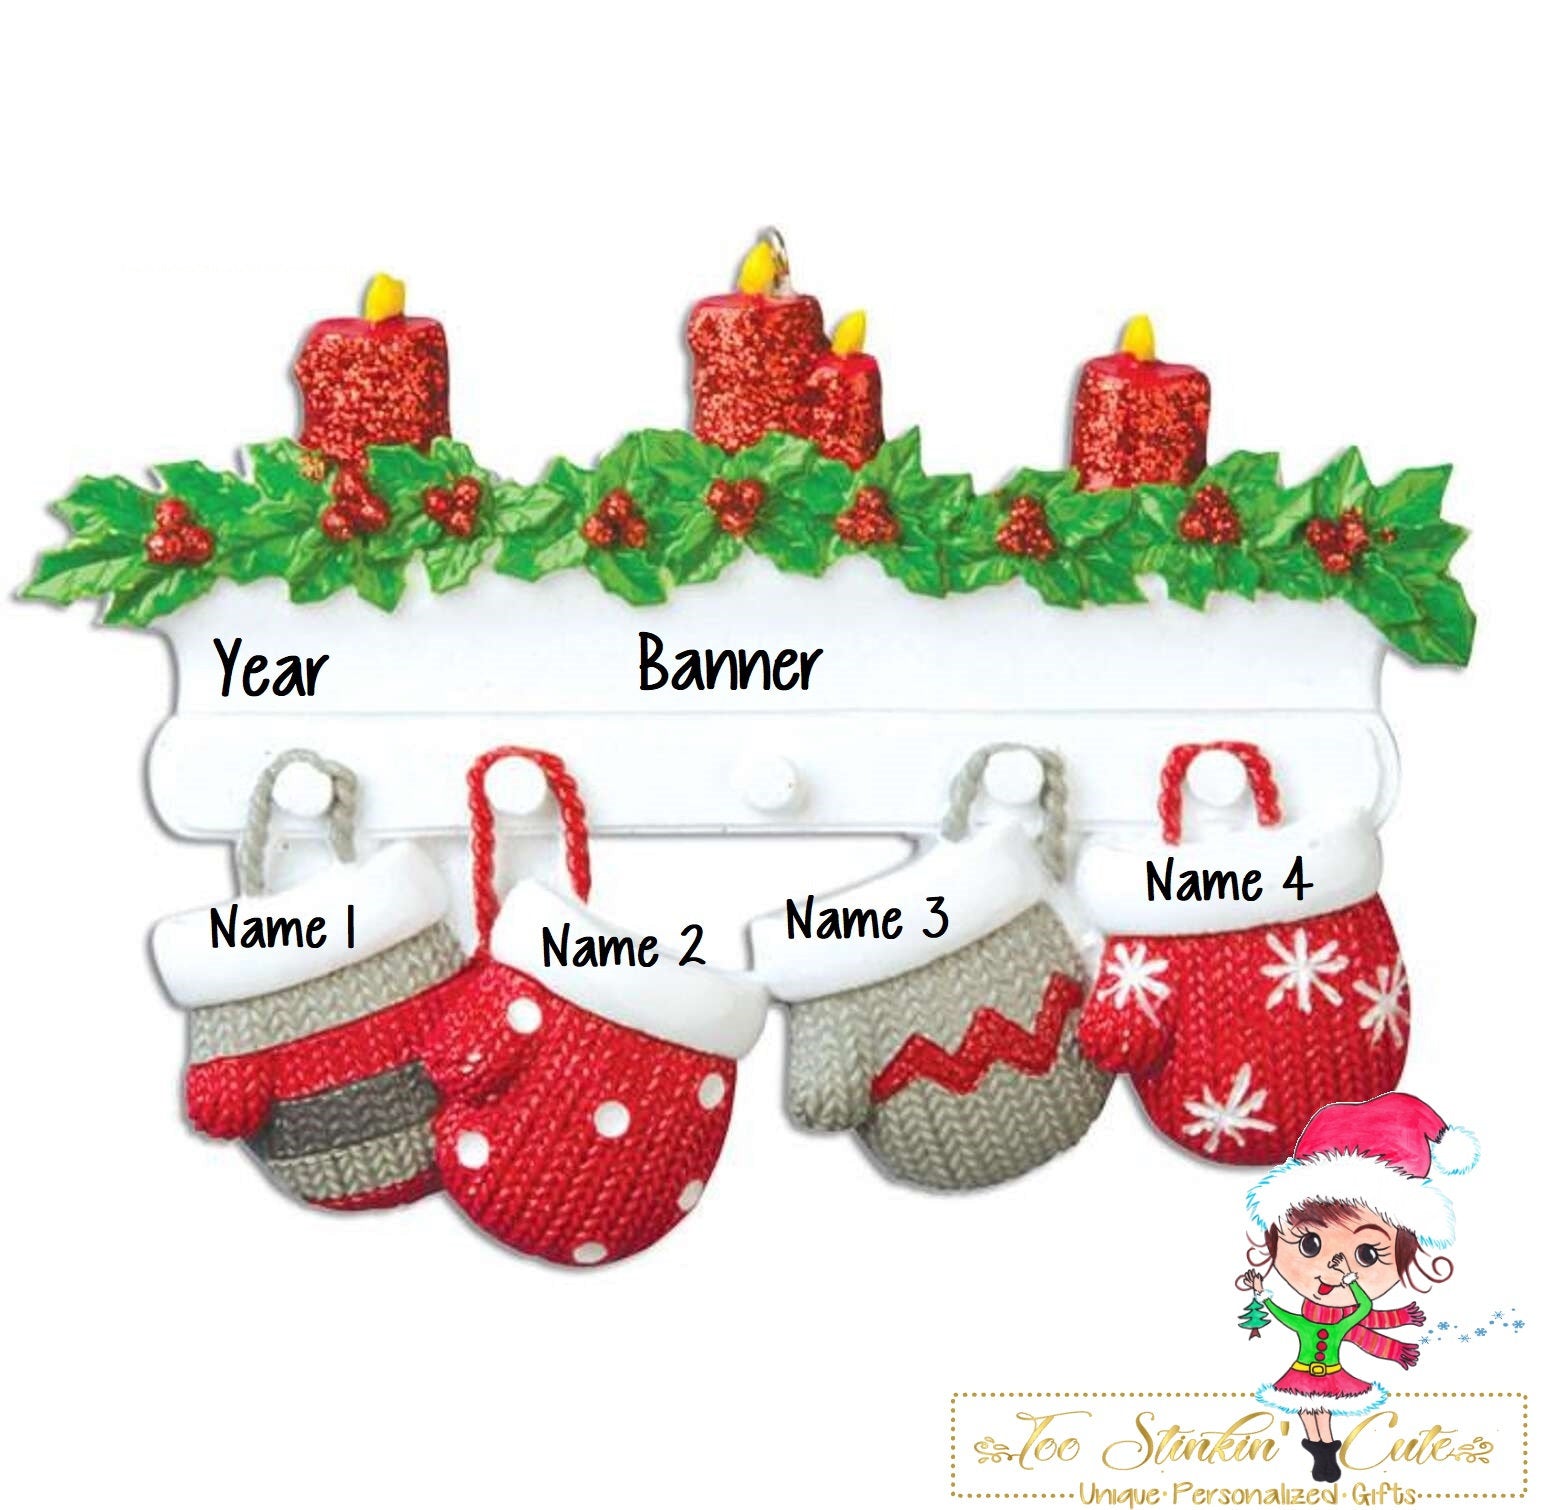 Personalized Christmas Ornament Stockings Mitten Family of 4/Best Friends/ Coworkers + Free Shipping!